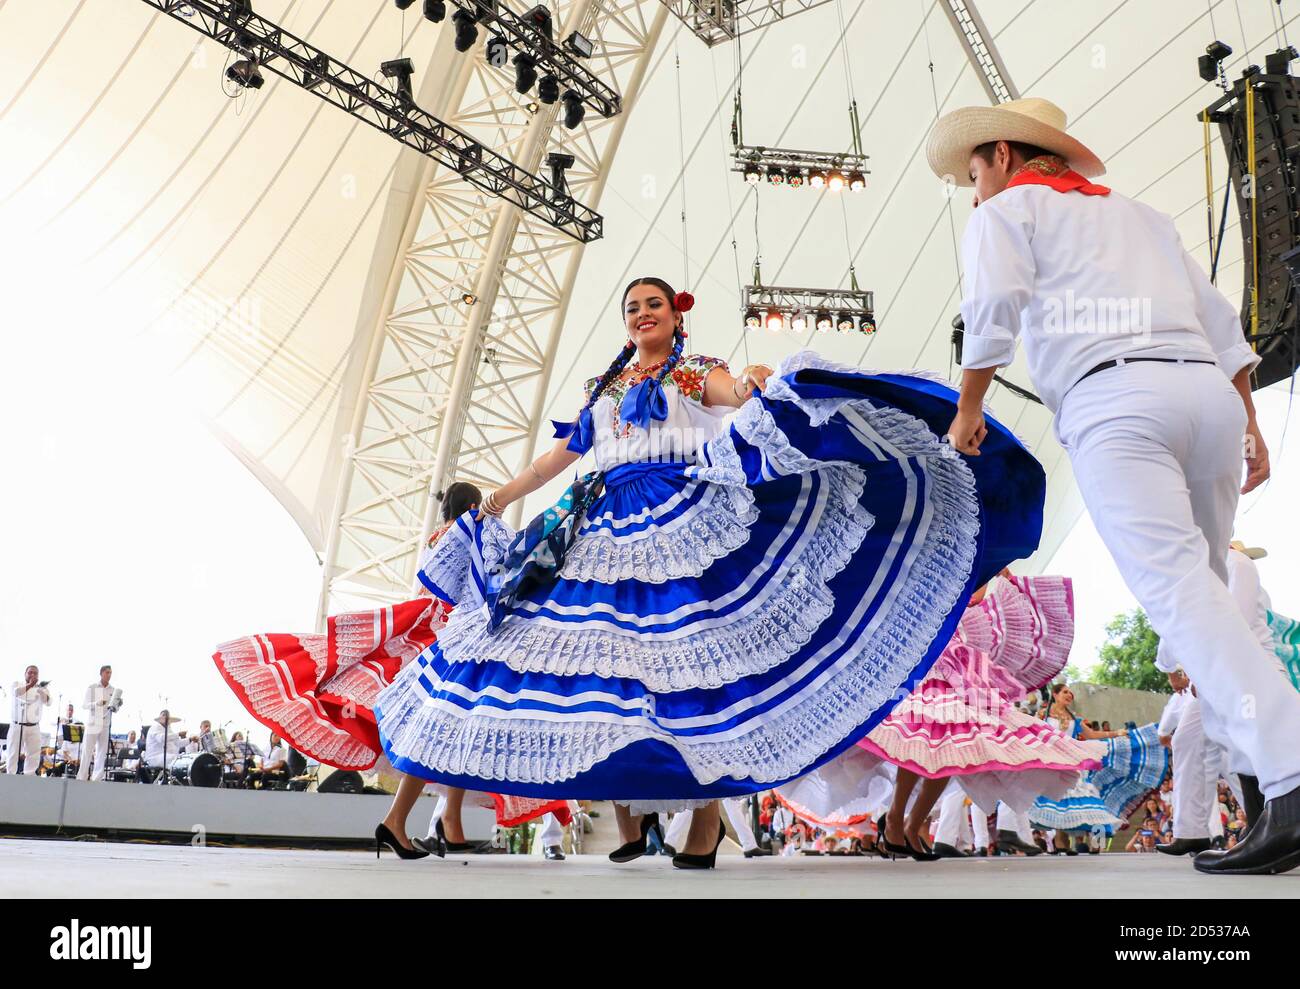 OAXACA, MEXICO - Jul 30, 2019: Women and men from the state of oaxaca, Mexico dancing in the 'Guelaguetza' in 2019 Stock Photo